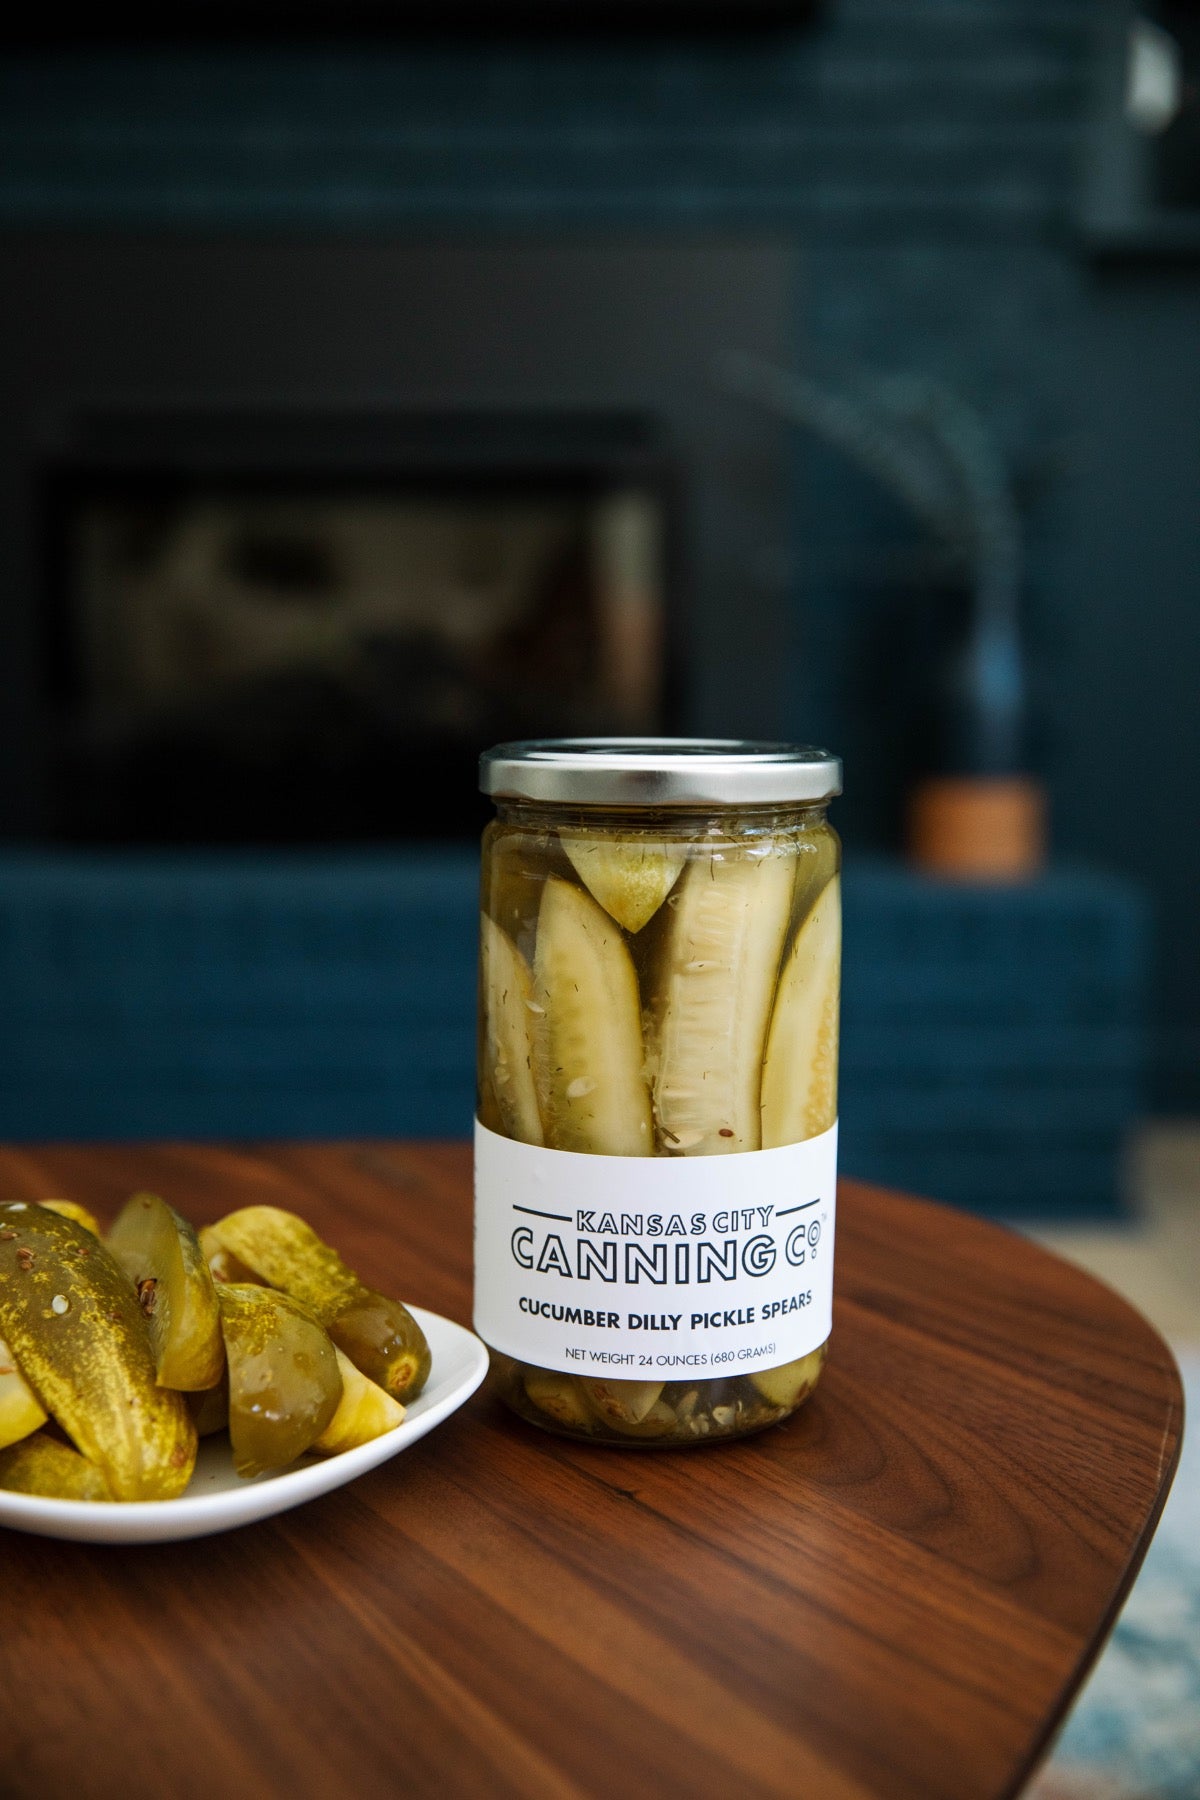 Cucumber Dilly Pickle Spears - Kansas City Canning Co.